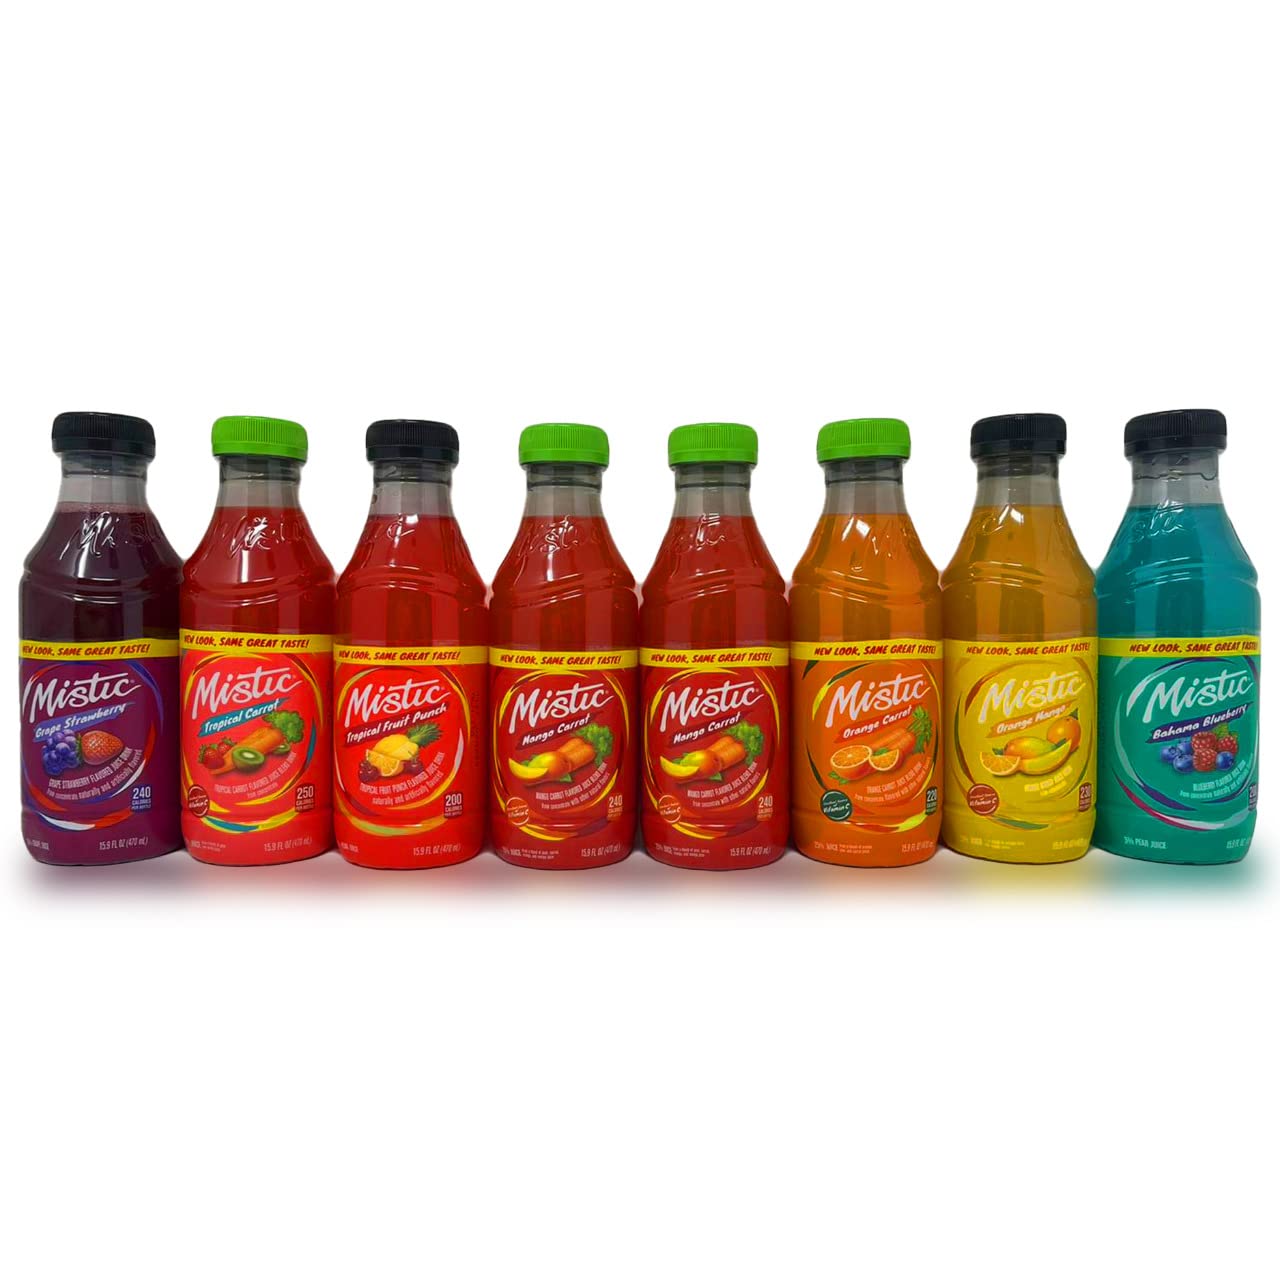 Mistic Tropical Drink Variety Pack, 15.9oz